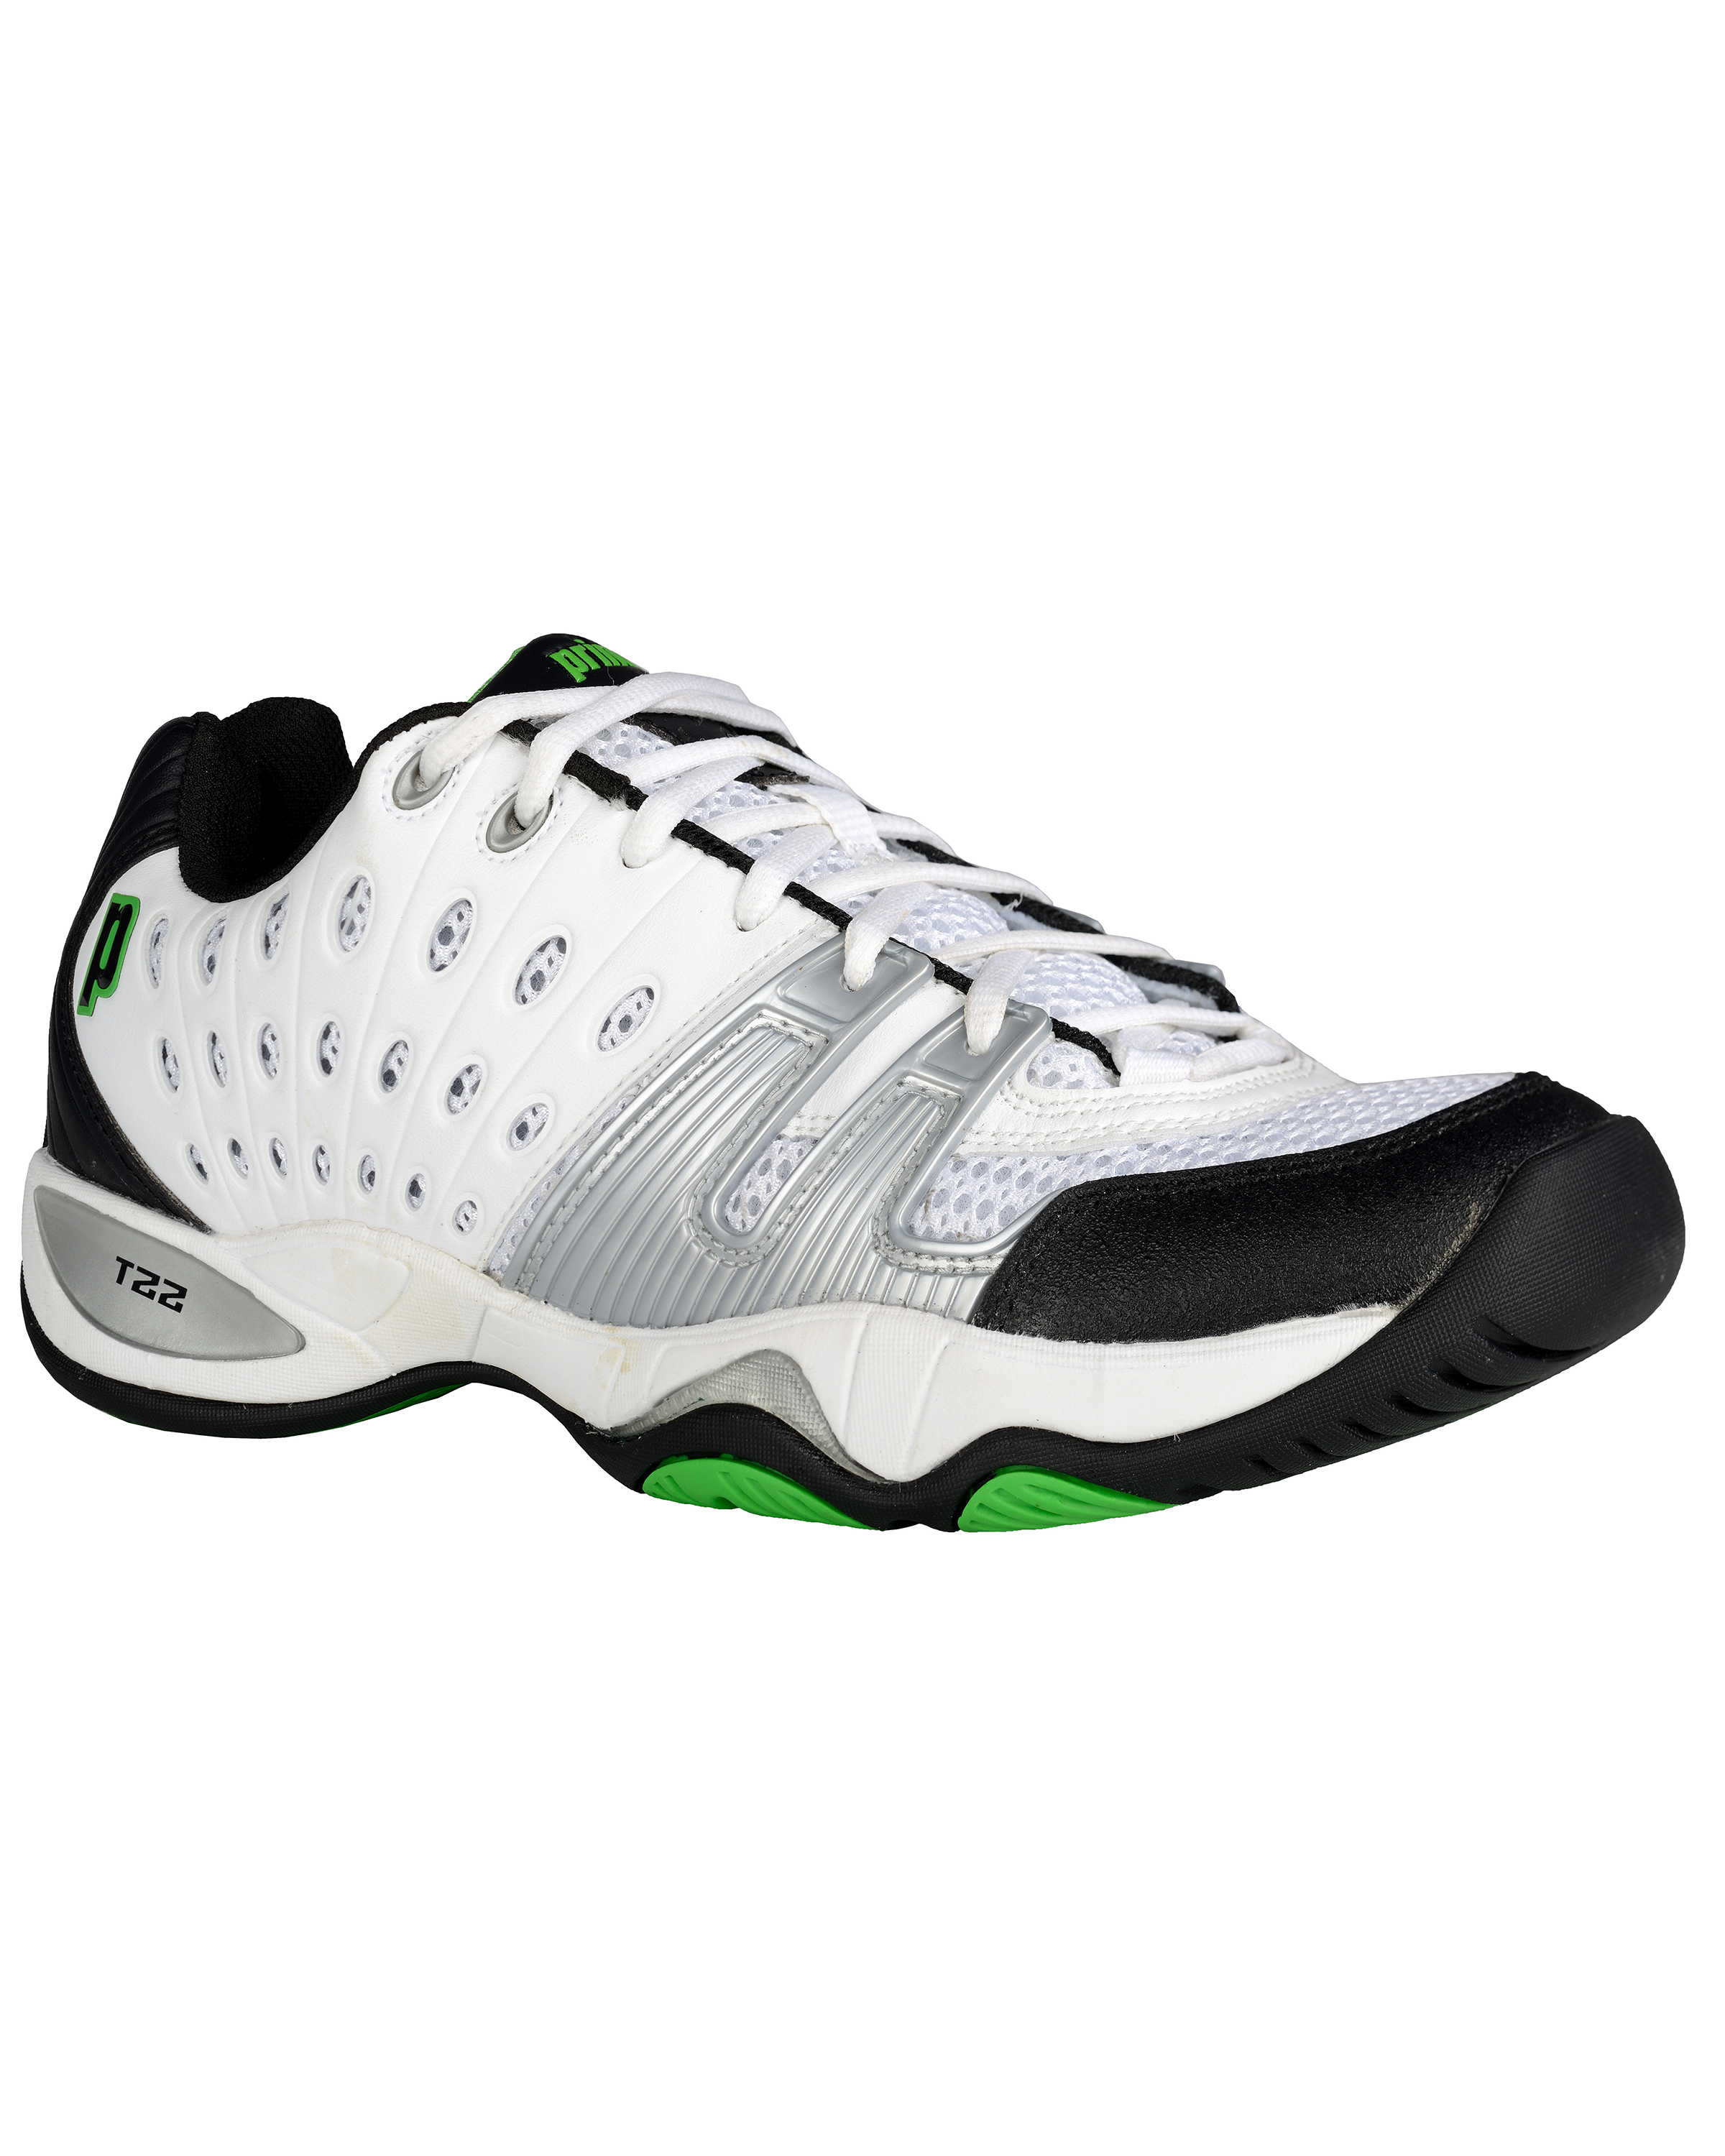 Mens T22 (White_Black_Green) - Angle 1 8P984-149.png